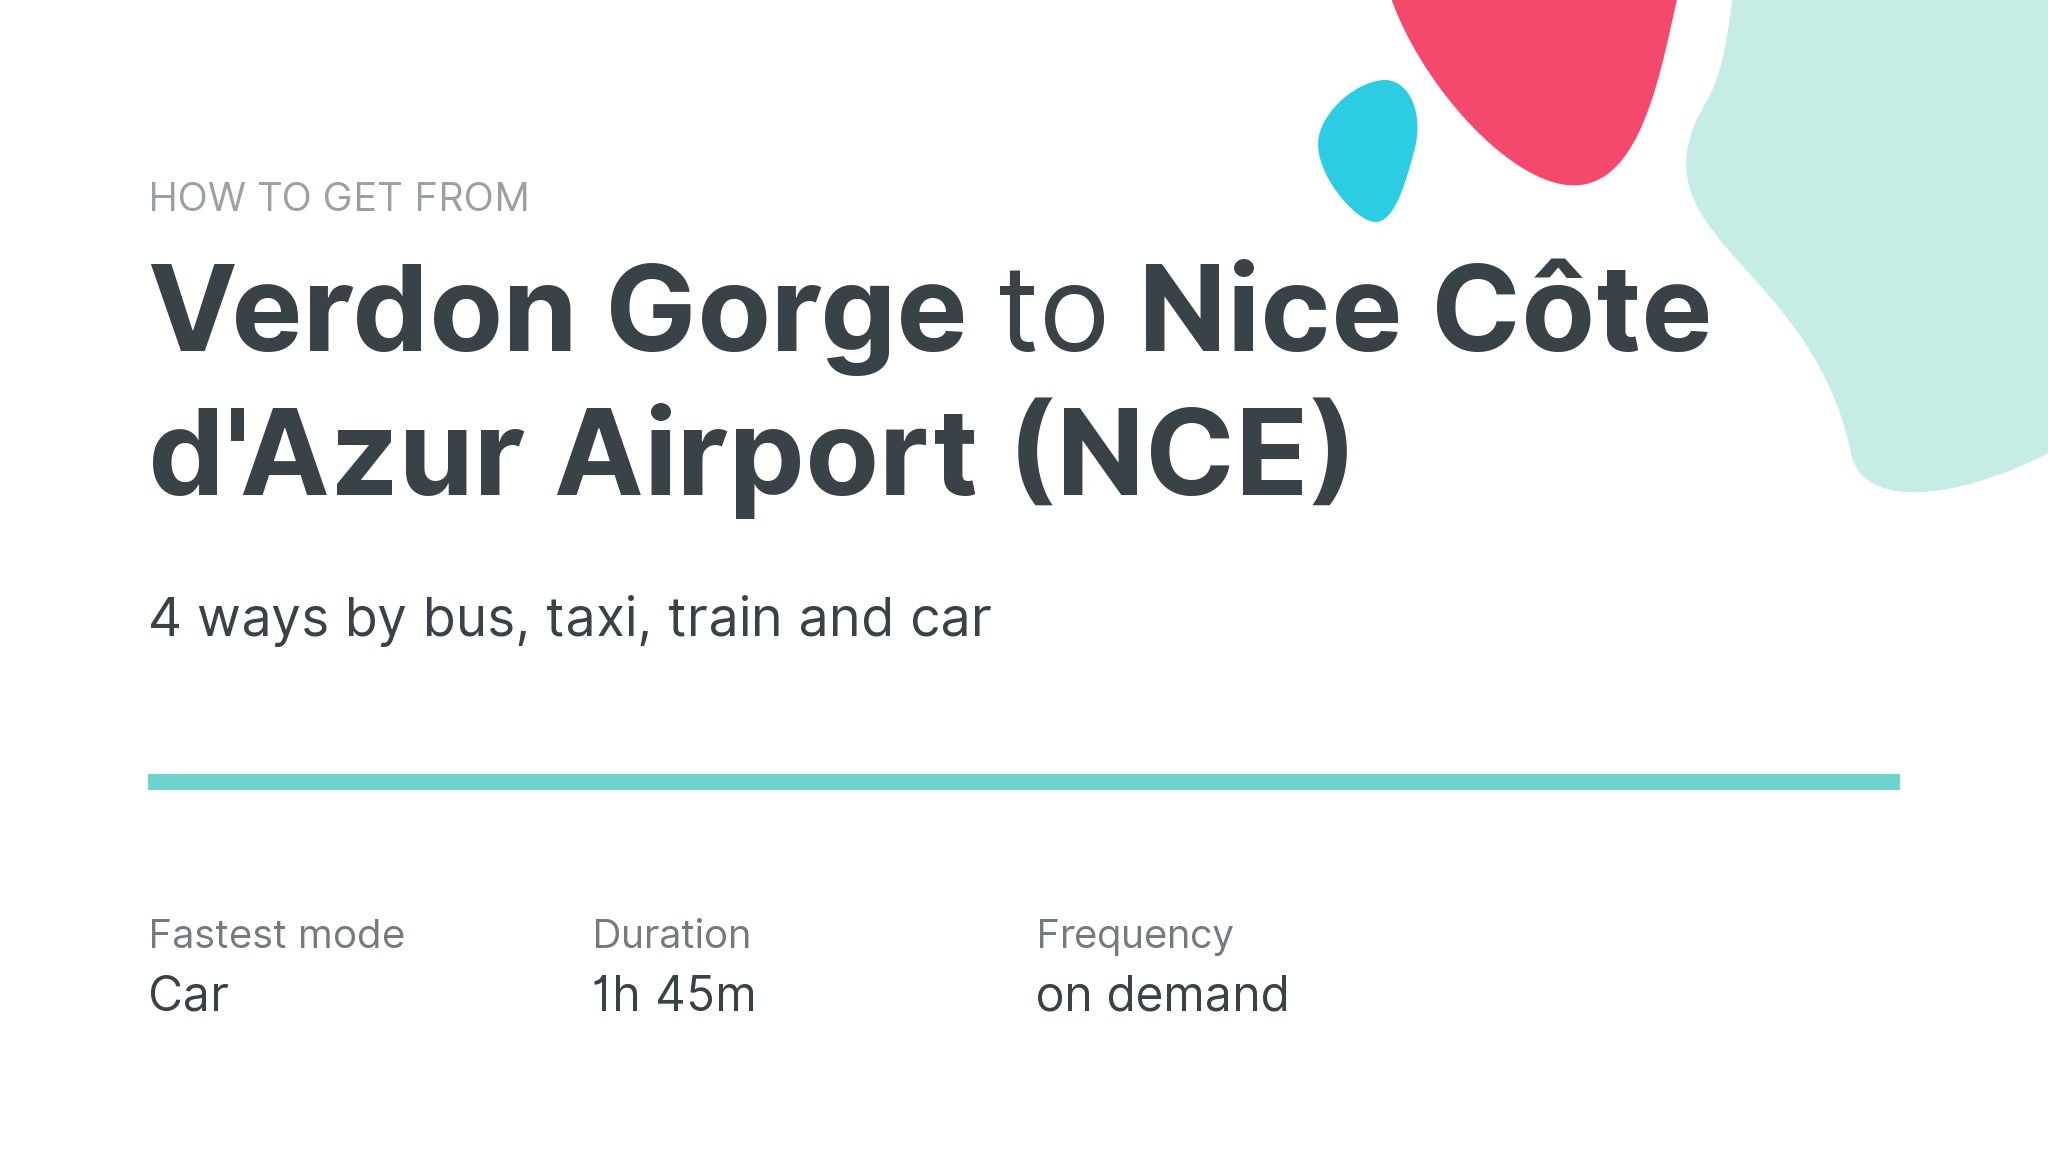 How do I get from Verdon Gorge to Nice Côte d'Azur Airport (NCE)